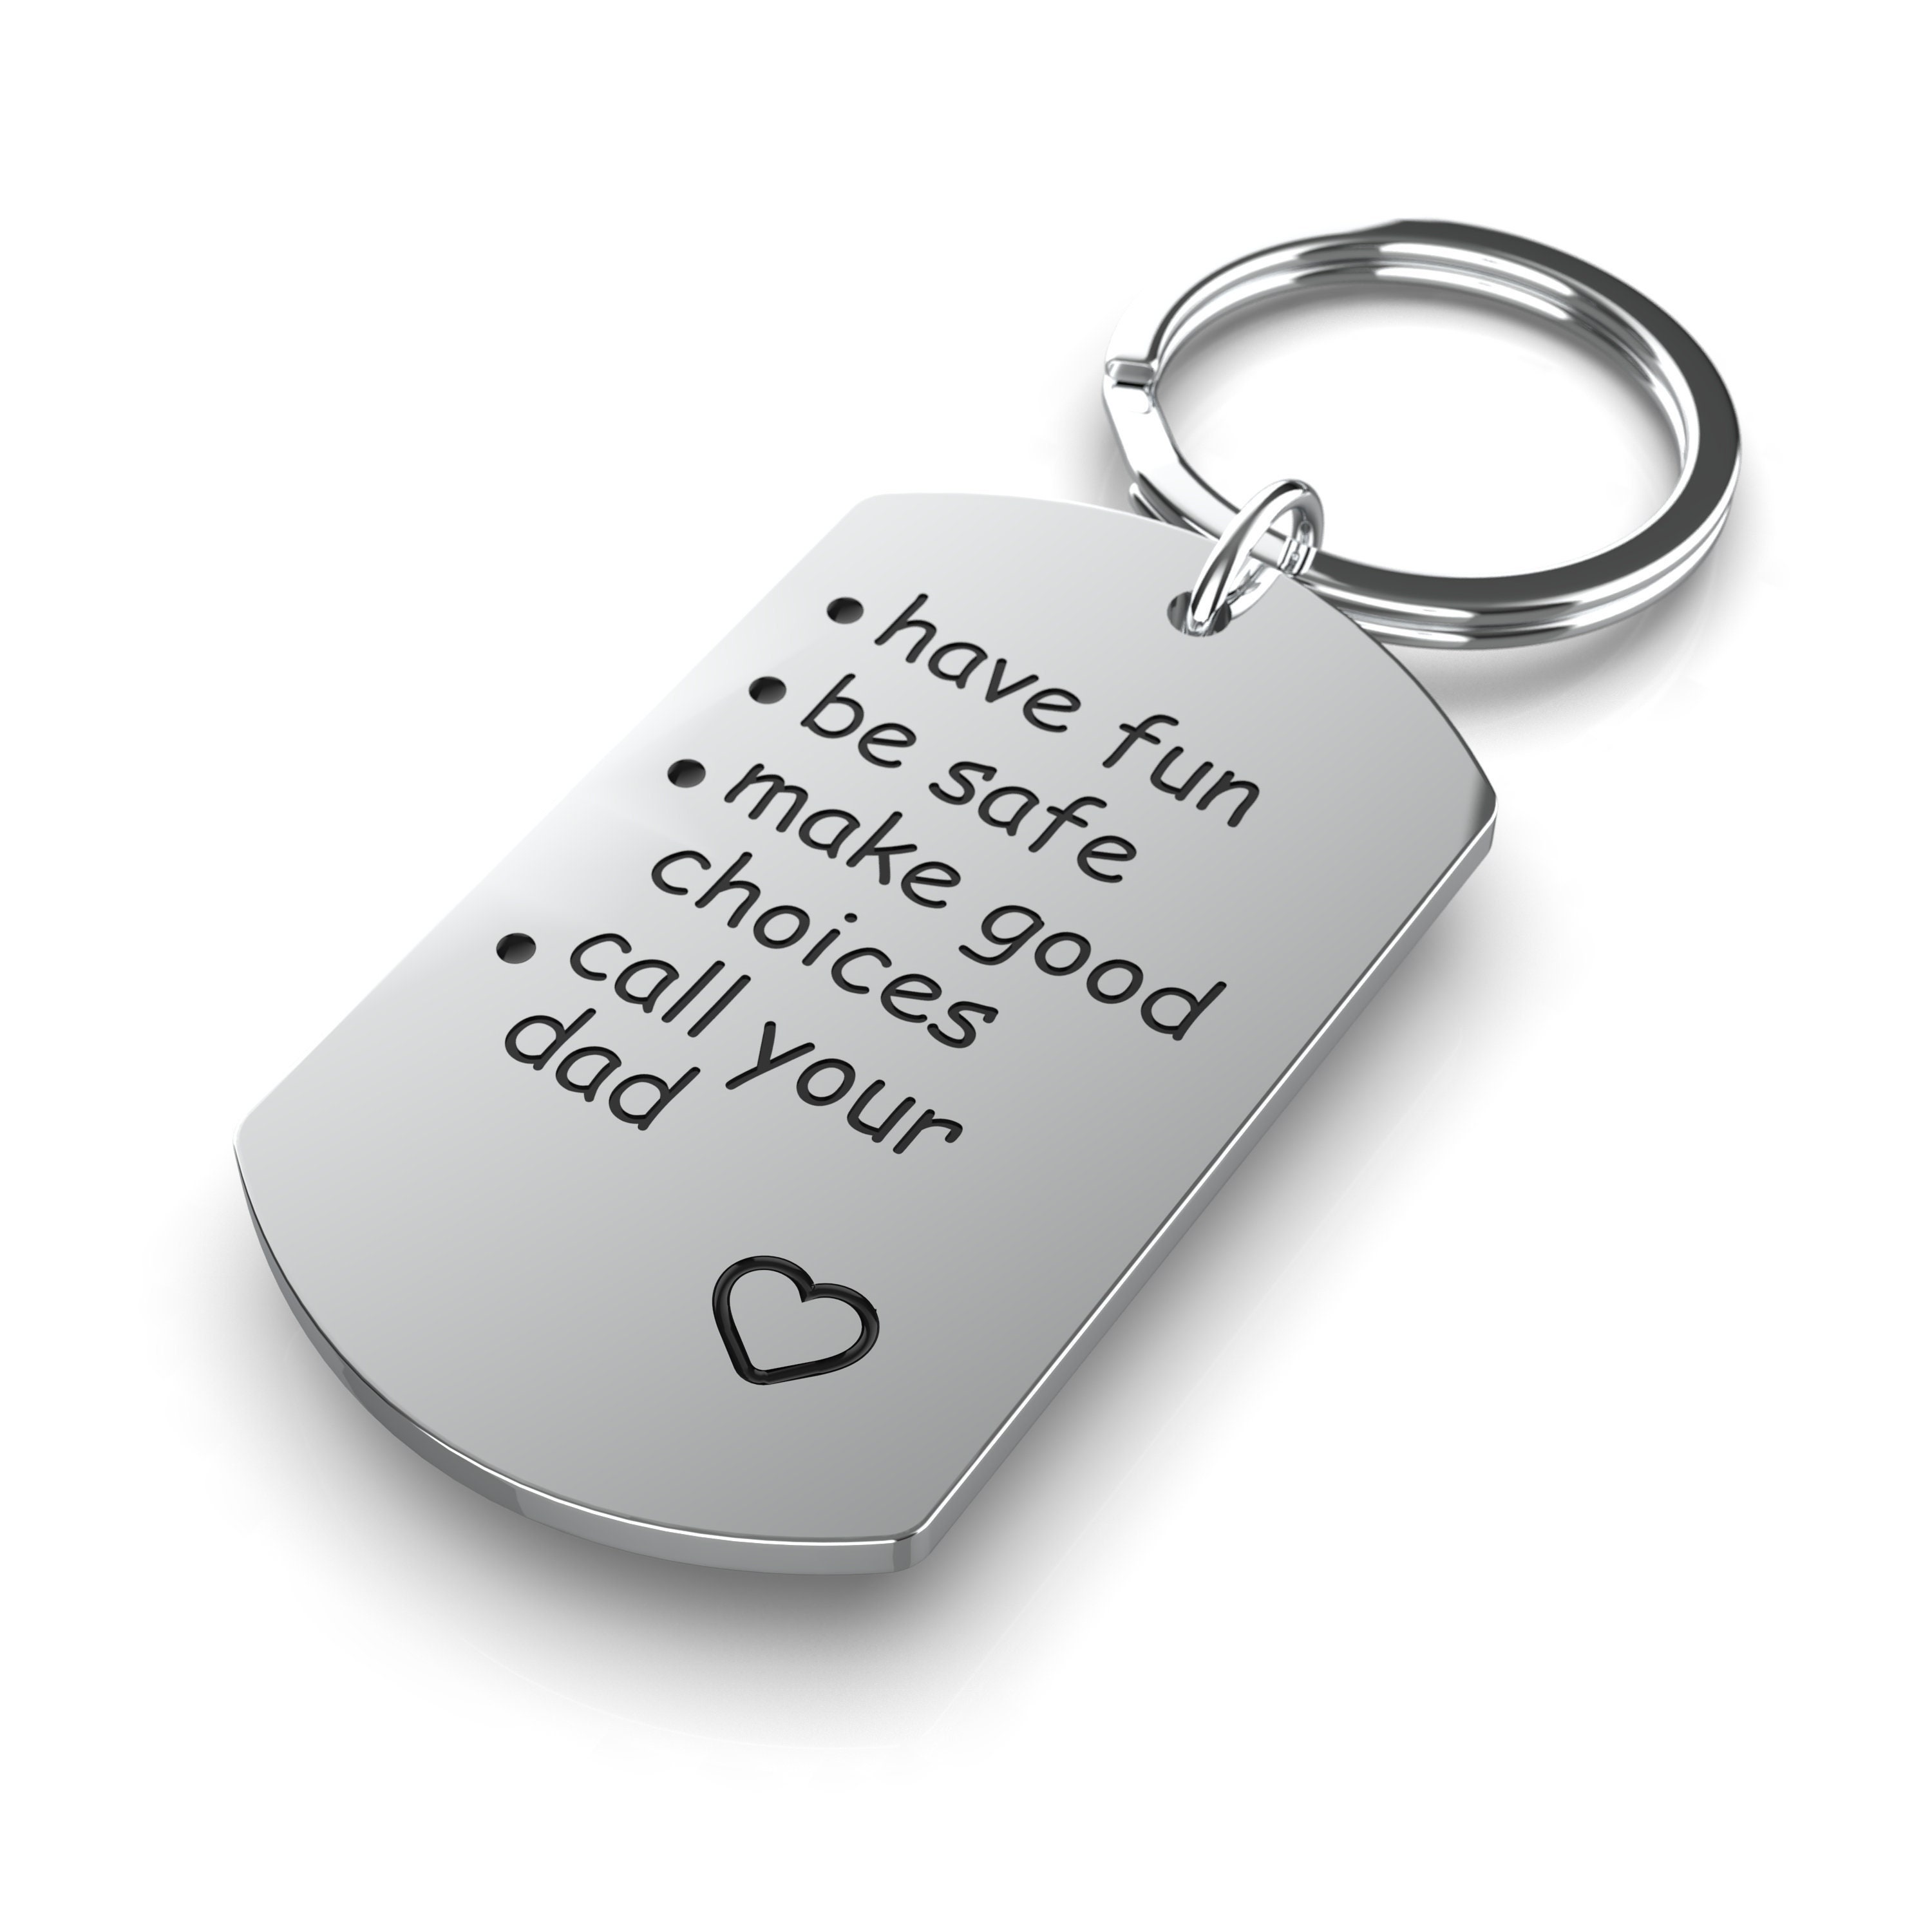 Have Fun Be Safe Make Good Choices and Call Your Dad Stainless Steel Etched  Keychain Personalization Available 